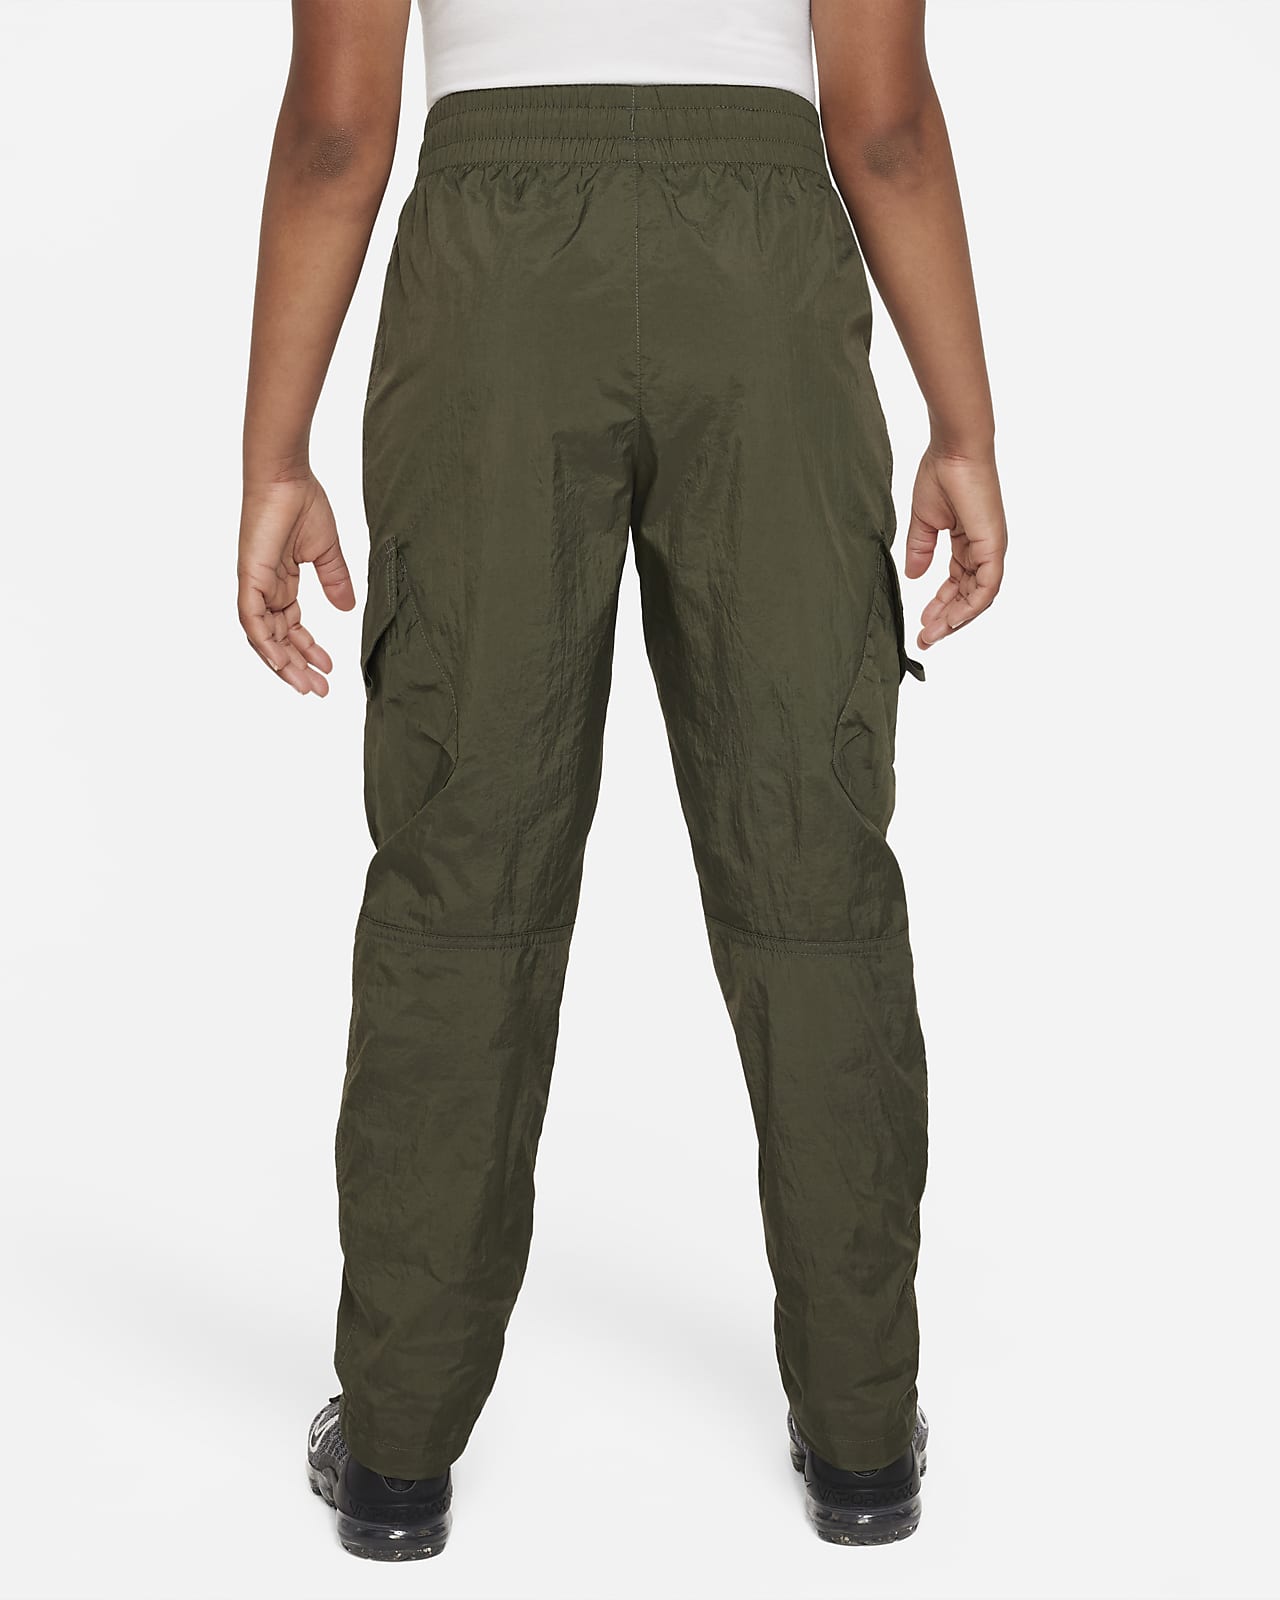 Mens Khaki And Black Halon Sports Direct Cargo Pants Loose Fit, Functional  Overalls For Students And Youth, Ankle Length, Spring Leg X0723 From  Mengqiqi02, $10.55 | DHgate.Com